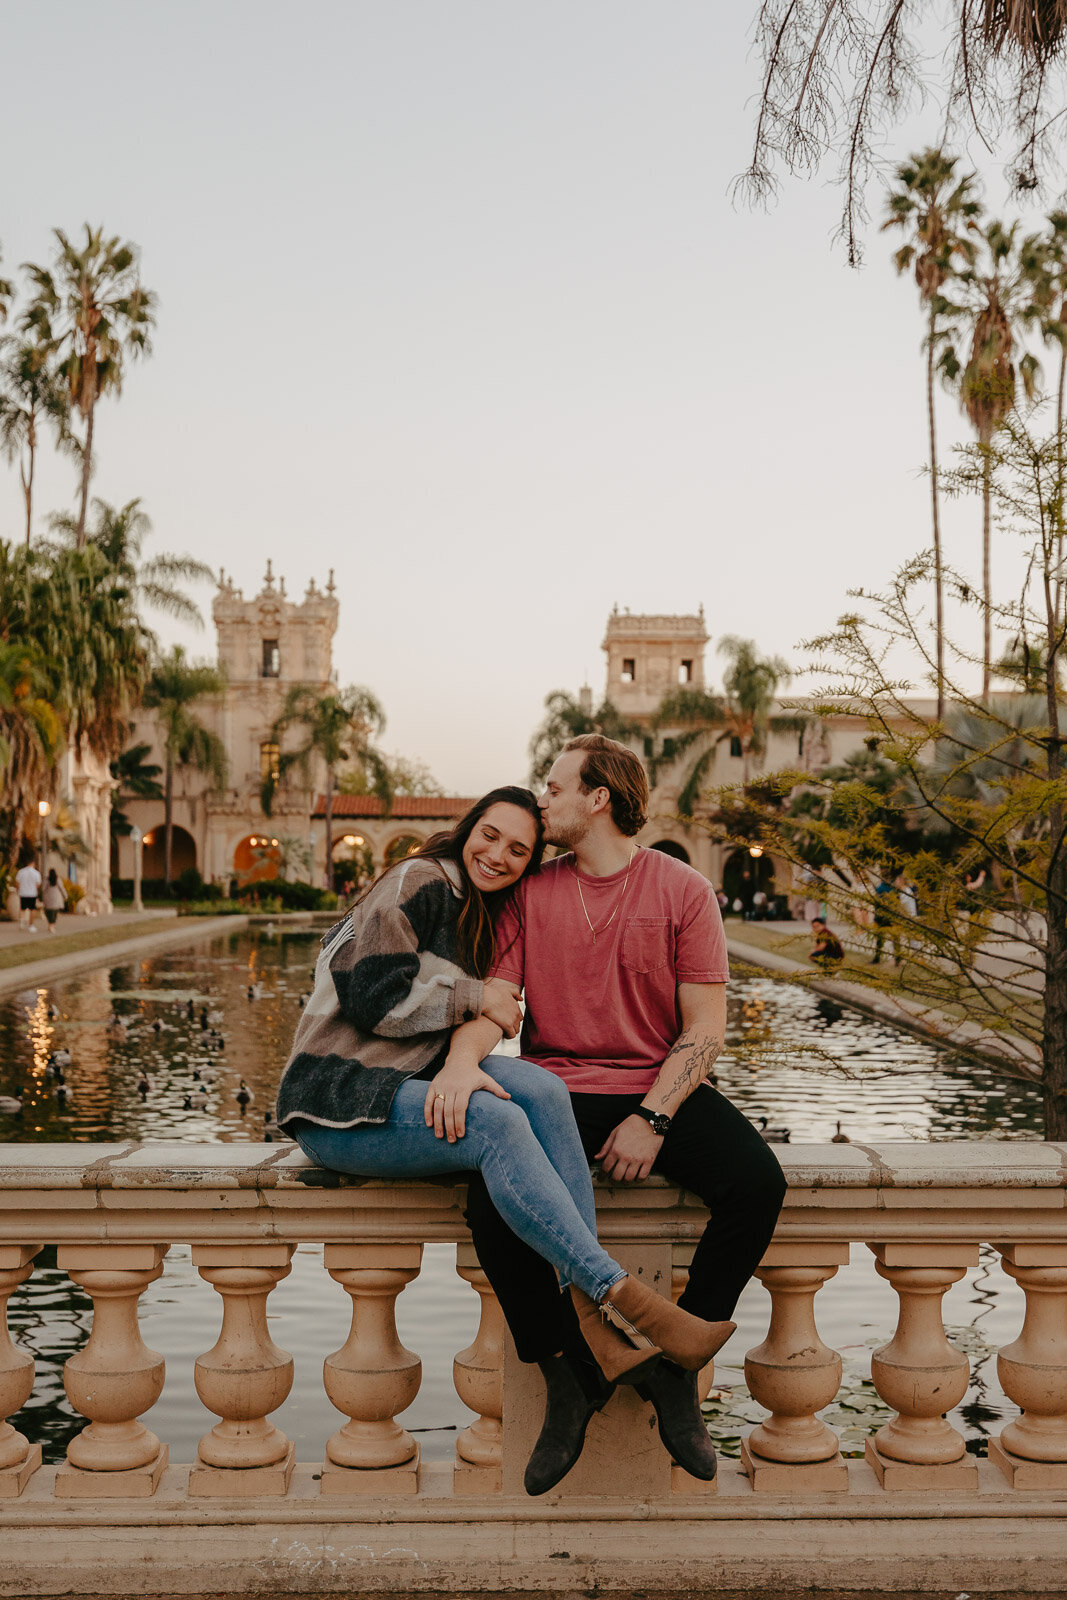 Lexx-Creative-Balboa-Park-With-Dogs-Engagement-22